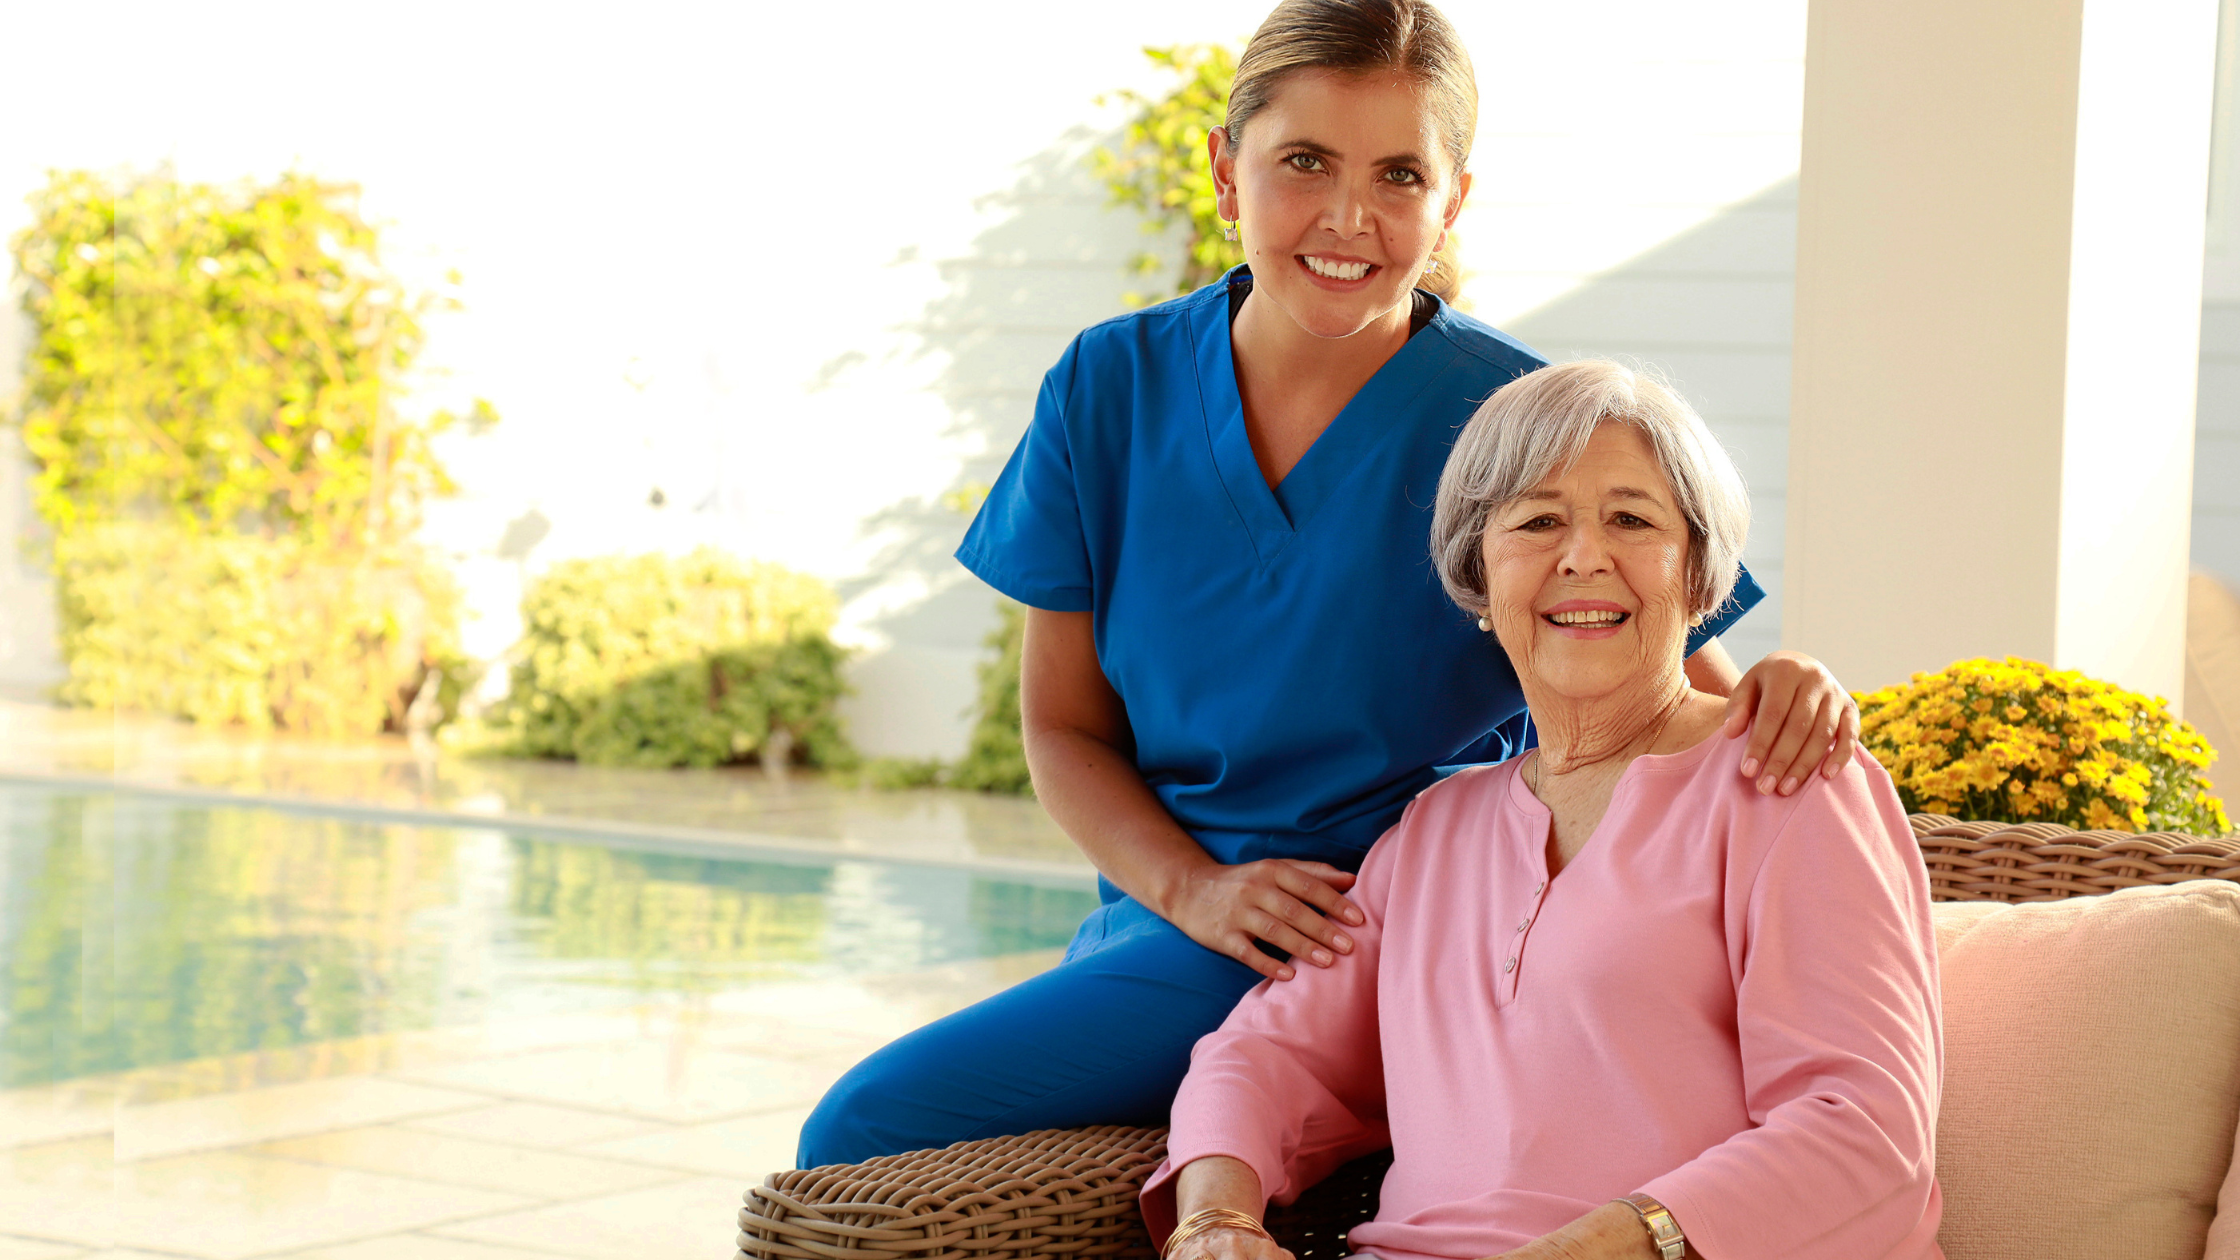 The Impact Of In-Home Caregivers On Senior Independence